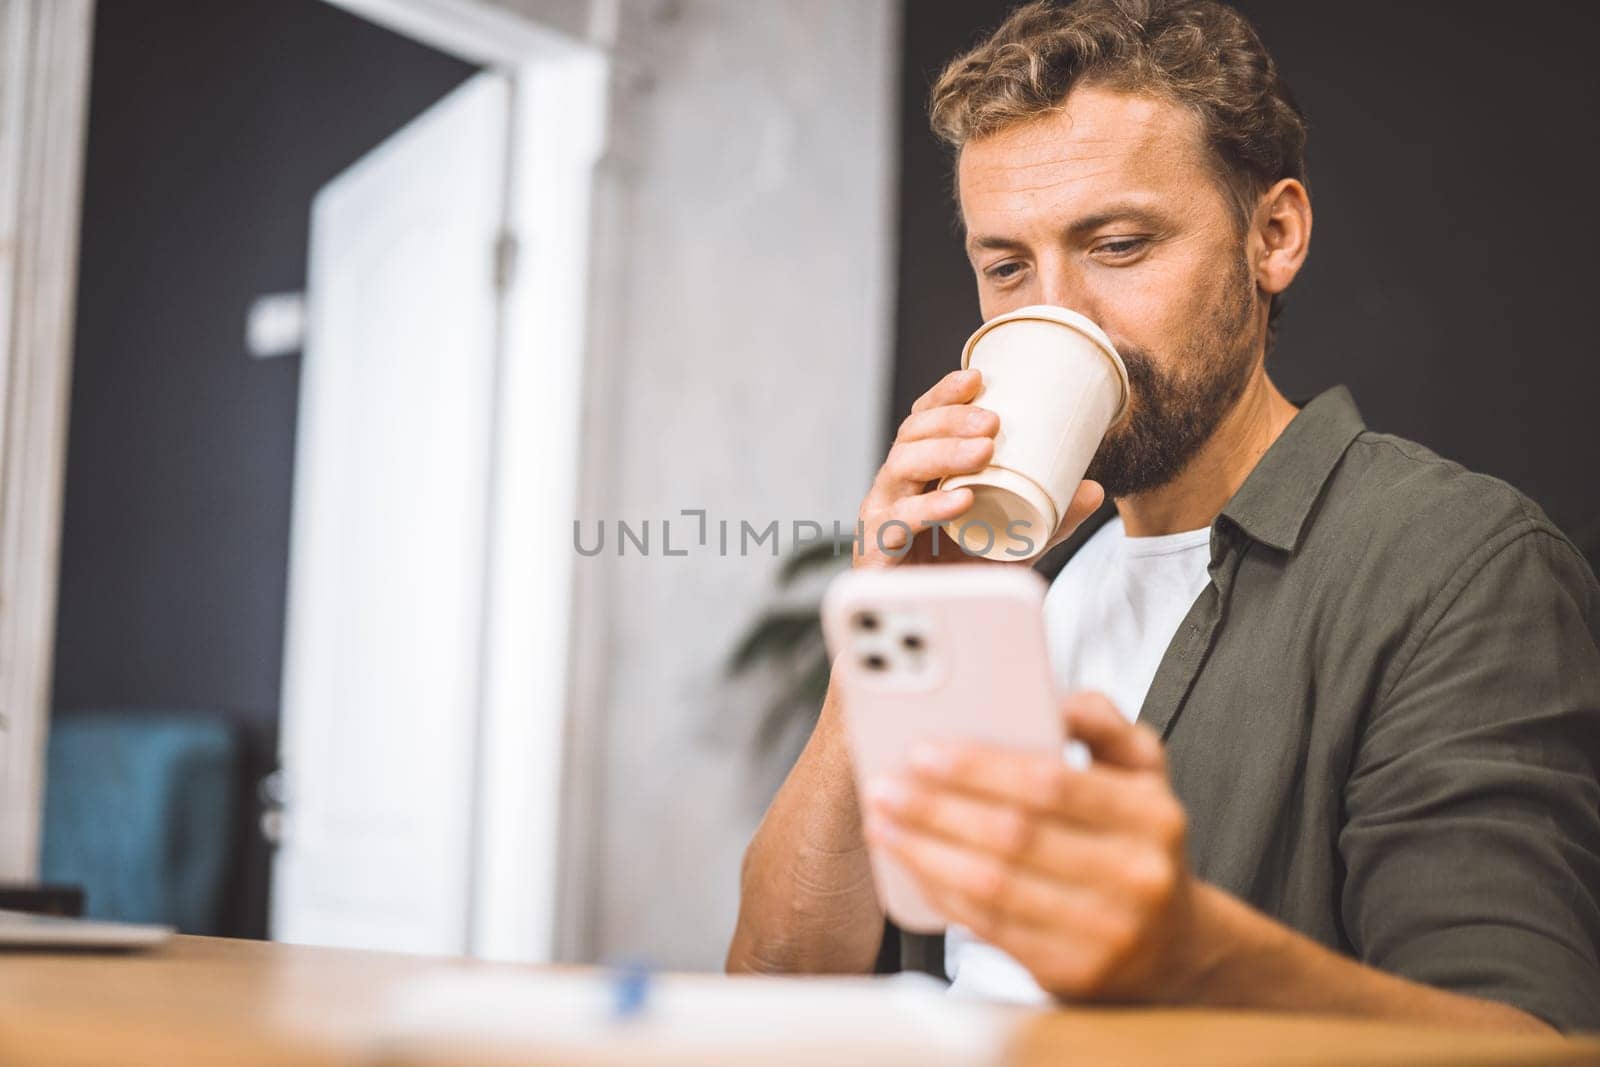 Copywriter focusing on their phone while enjoying cup of coffee home. Concept of working from home is emphasized here, highlighting freedom and flexibility that comes with being self-employed freelancer. by LipikStockMedia